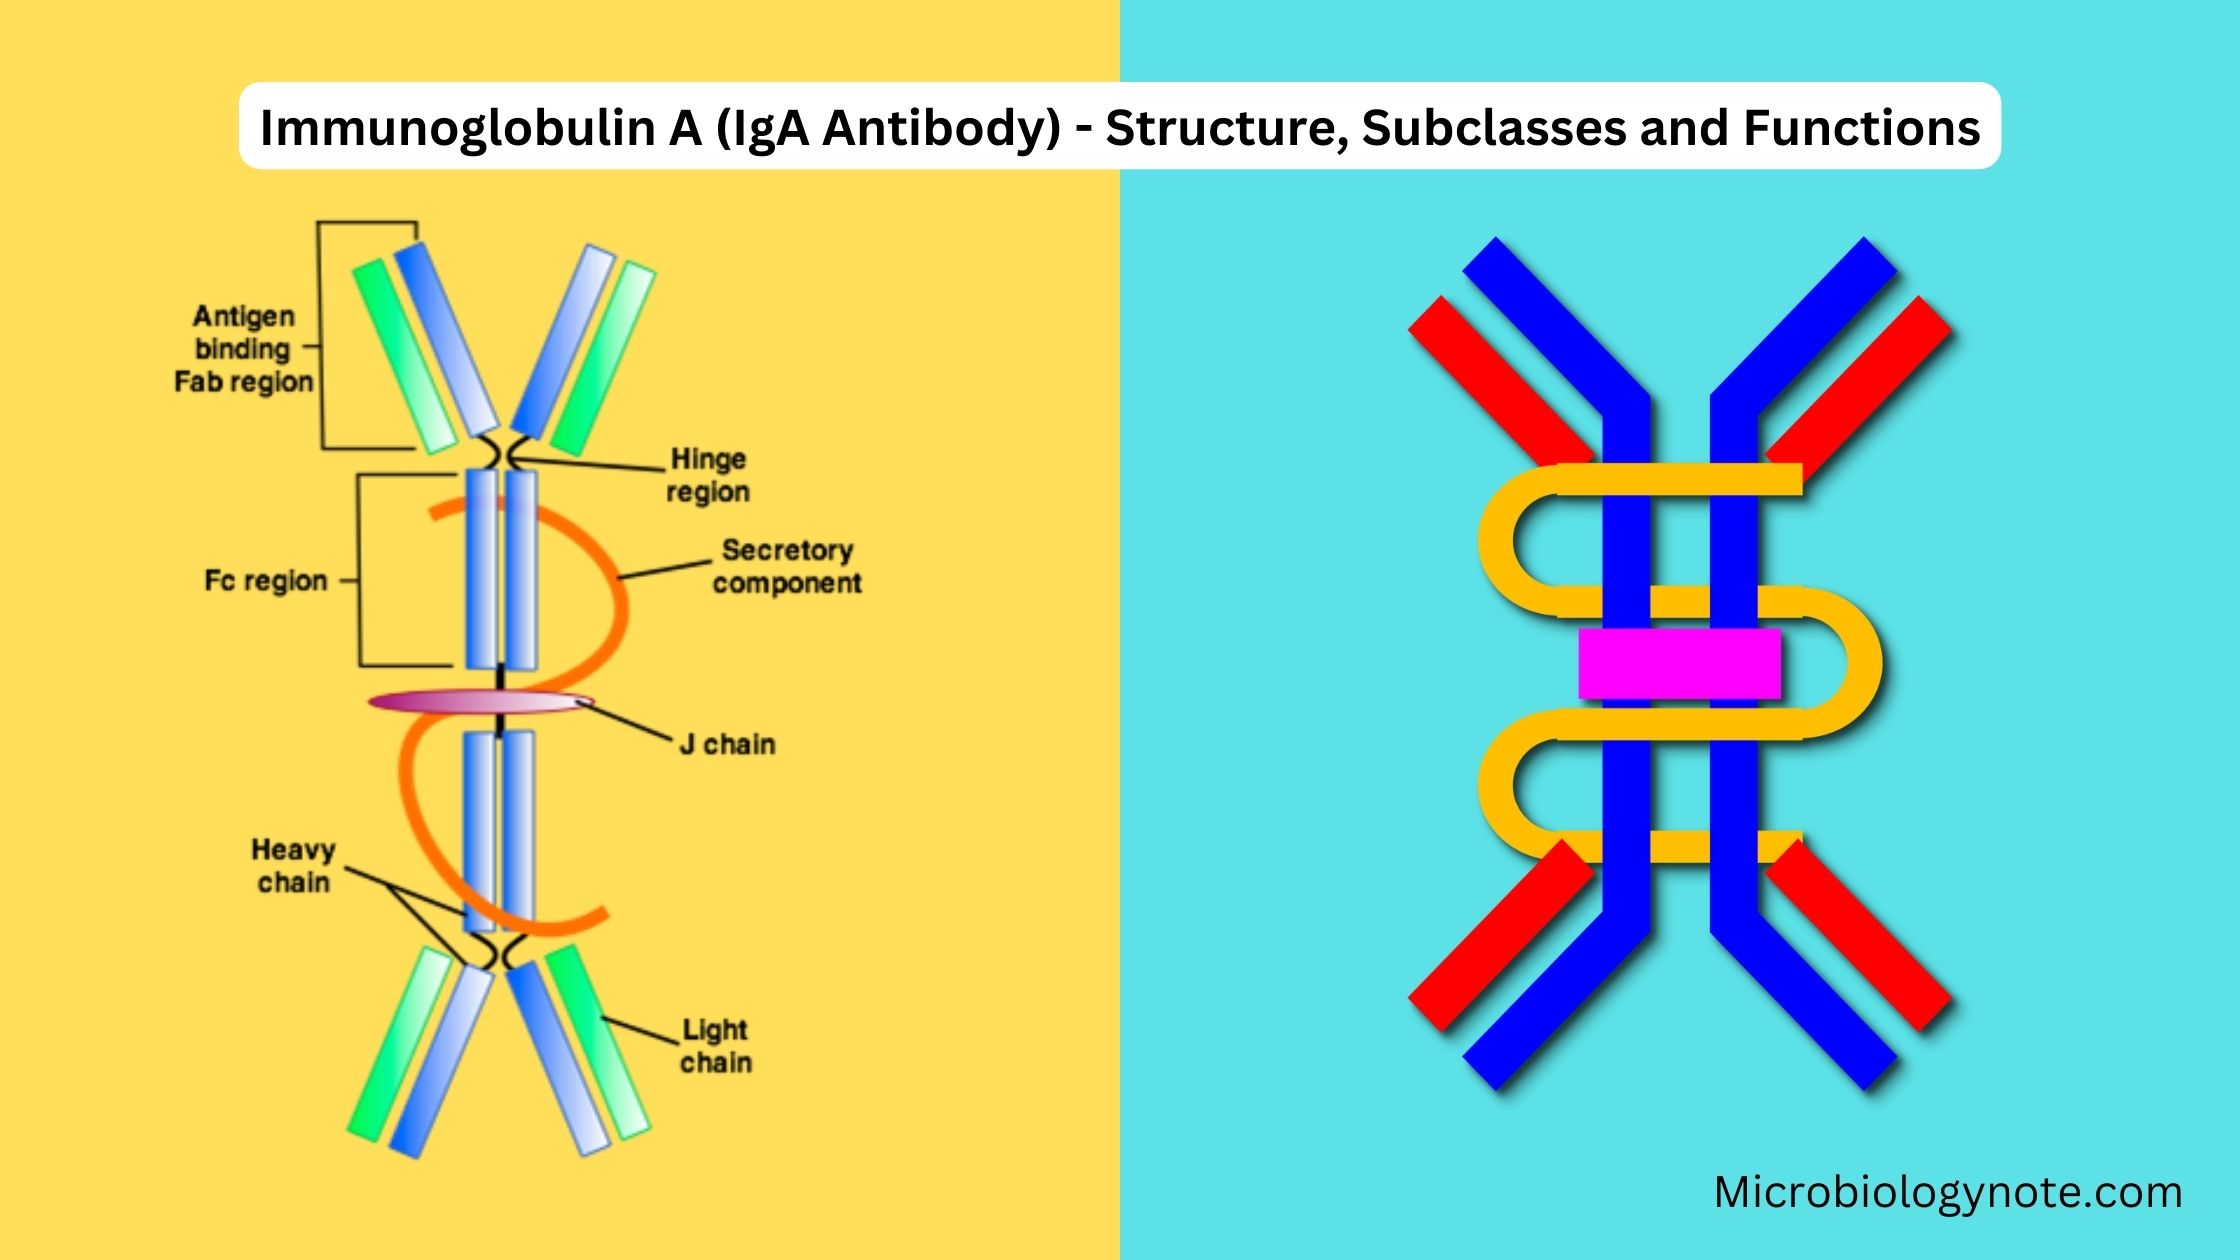 Immunoglobulin A (IgA Antibody) - Structure, Subclasses and Functions